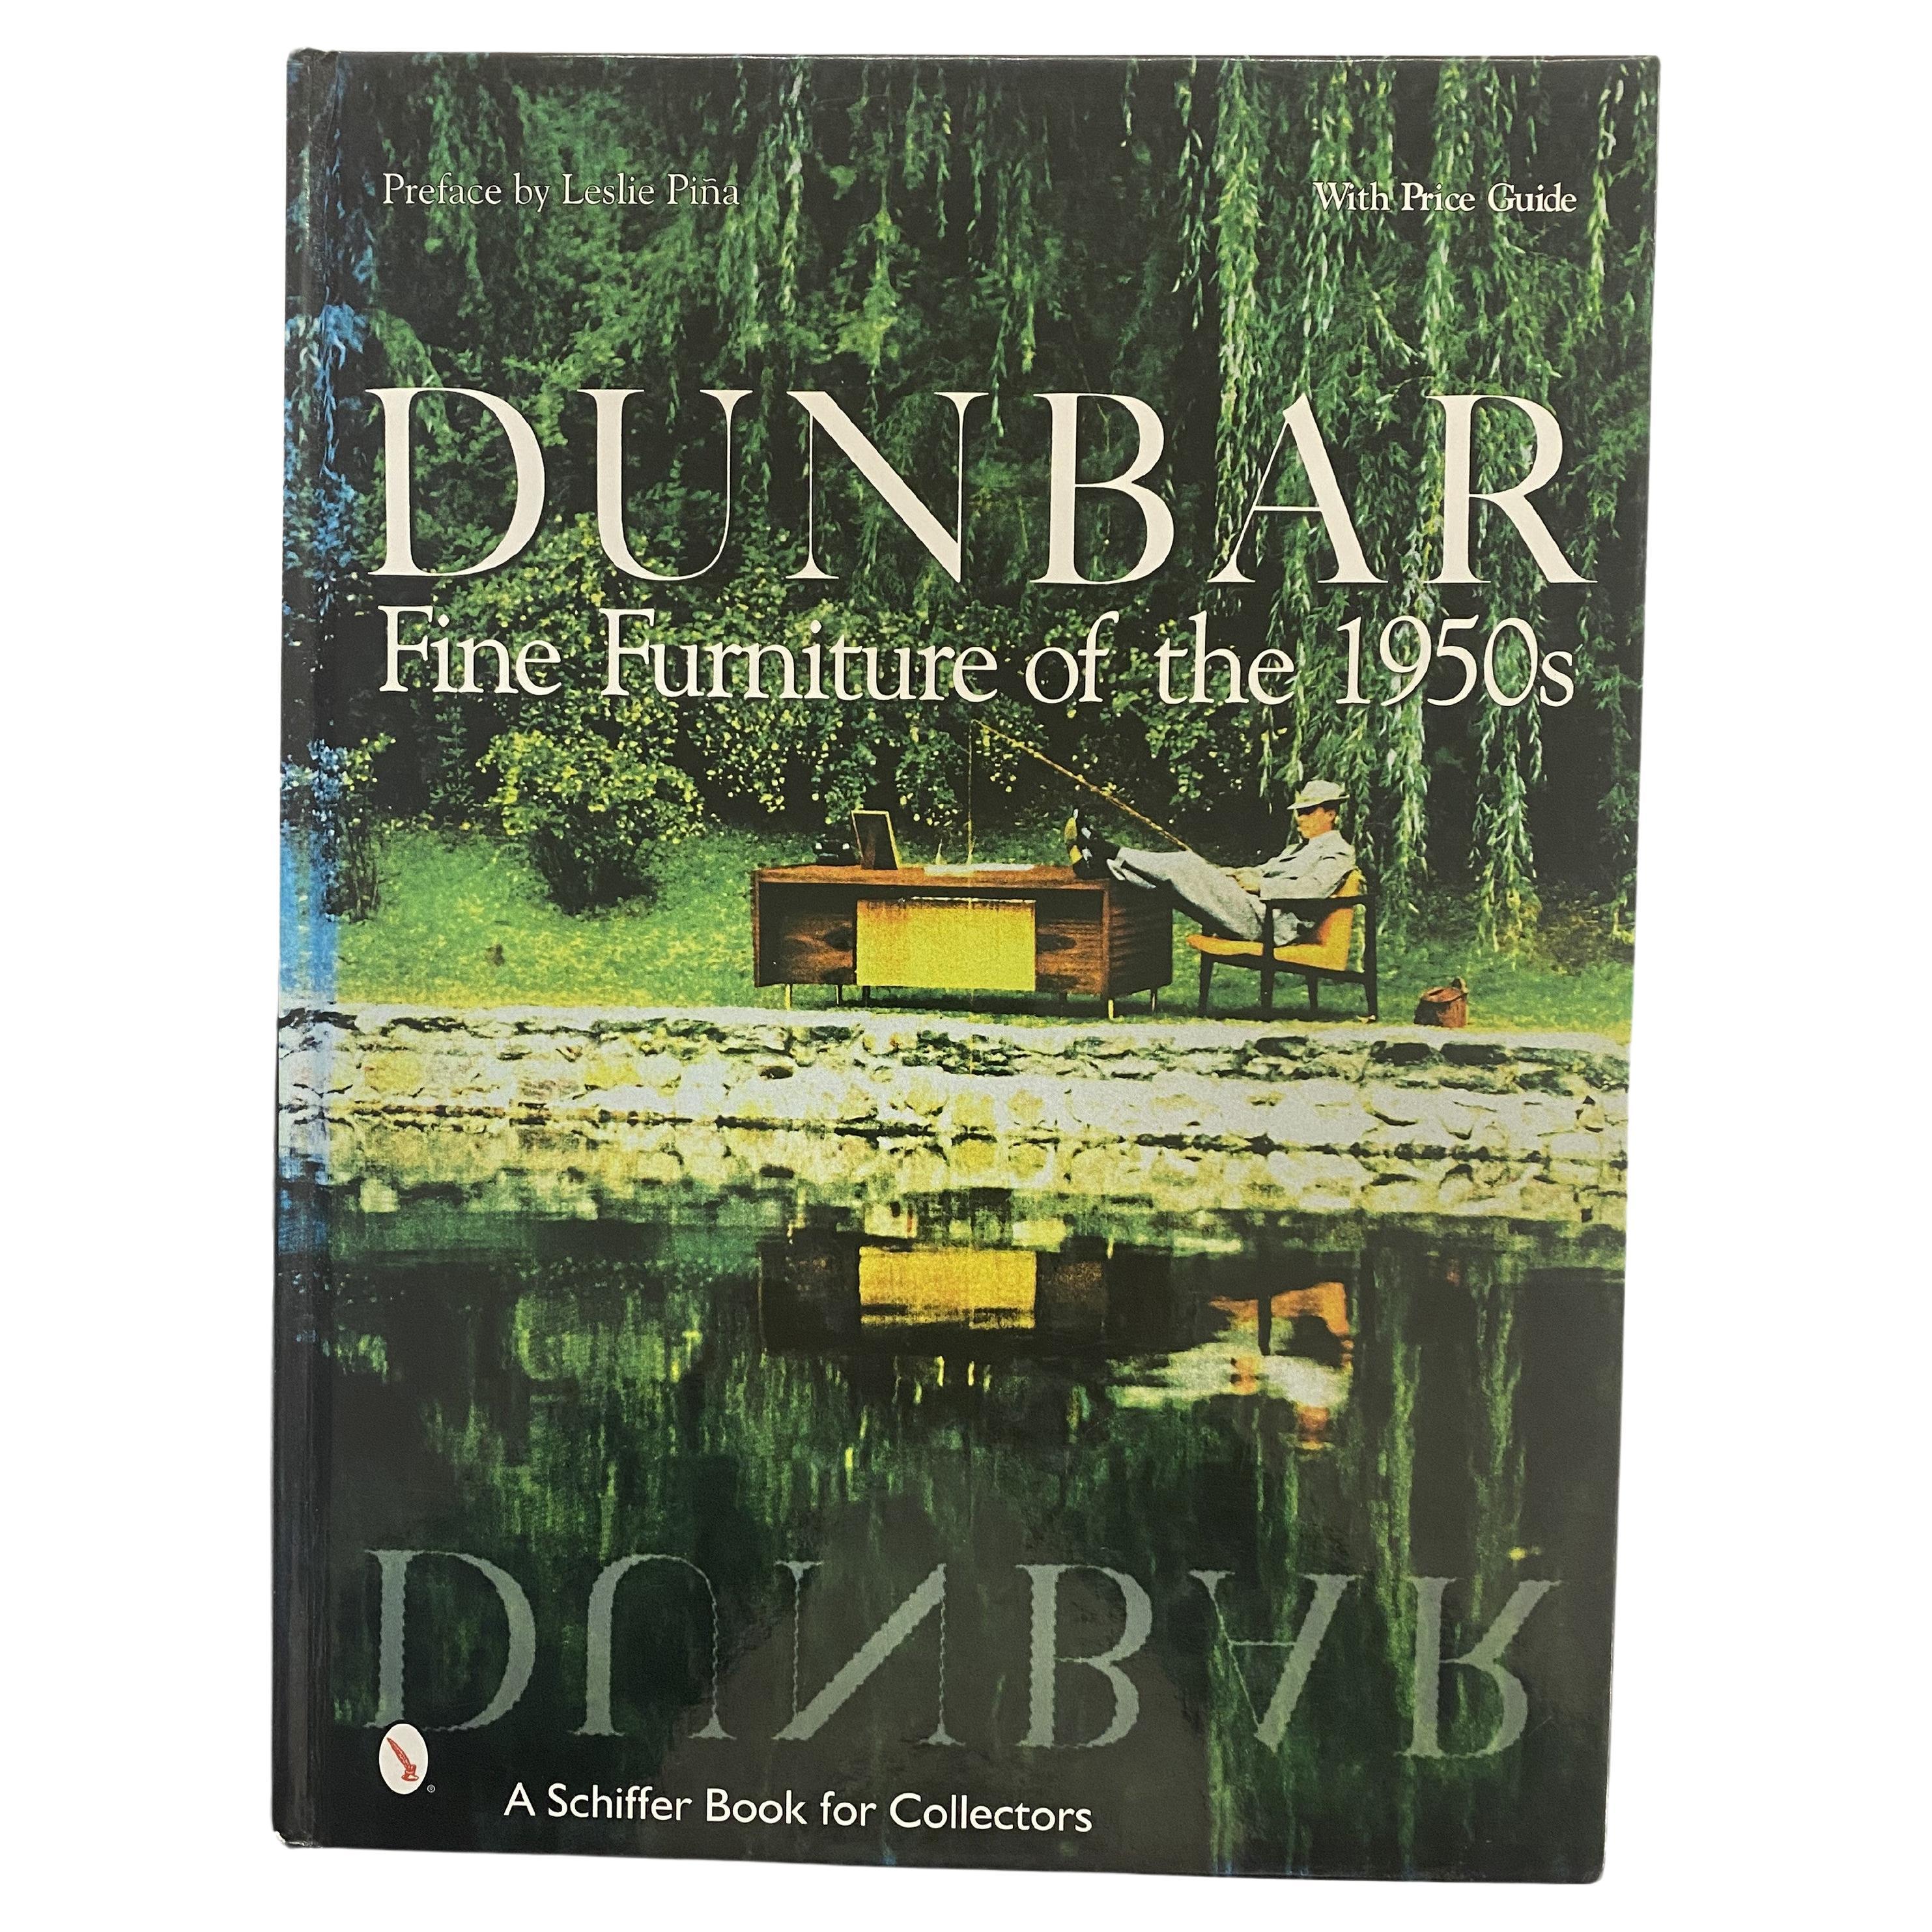 Dunbar: Fine Furniture of the 1950's preface by Leslie Pina (Book) For Sale